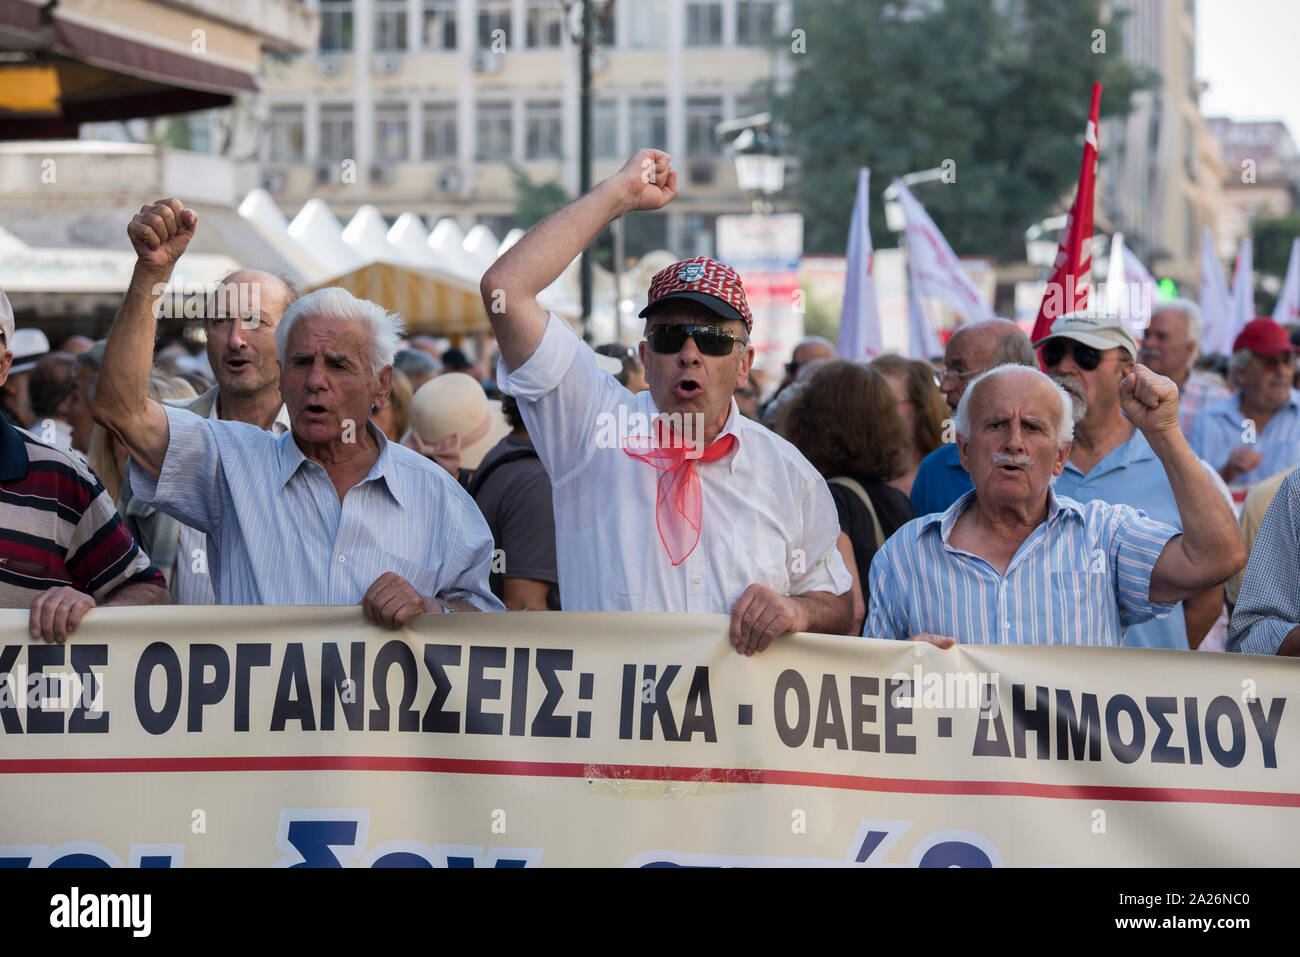 Athens, Greece. 1st Oct, 2019. Protesters march to the Ministry of Labor, shoutings slogans. Pensioners' unions took to the streets to protest over pension cuts and fiscal policies and demand return of their slashed pensions. Credit: Nikolas Georgiou/Alamy Live News Stock Photo